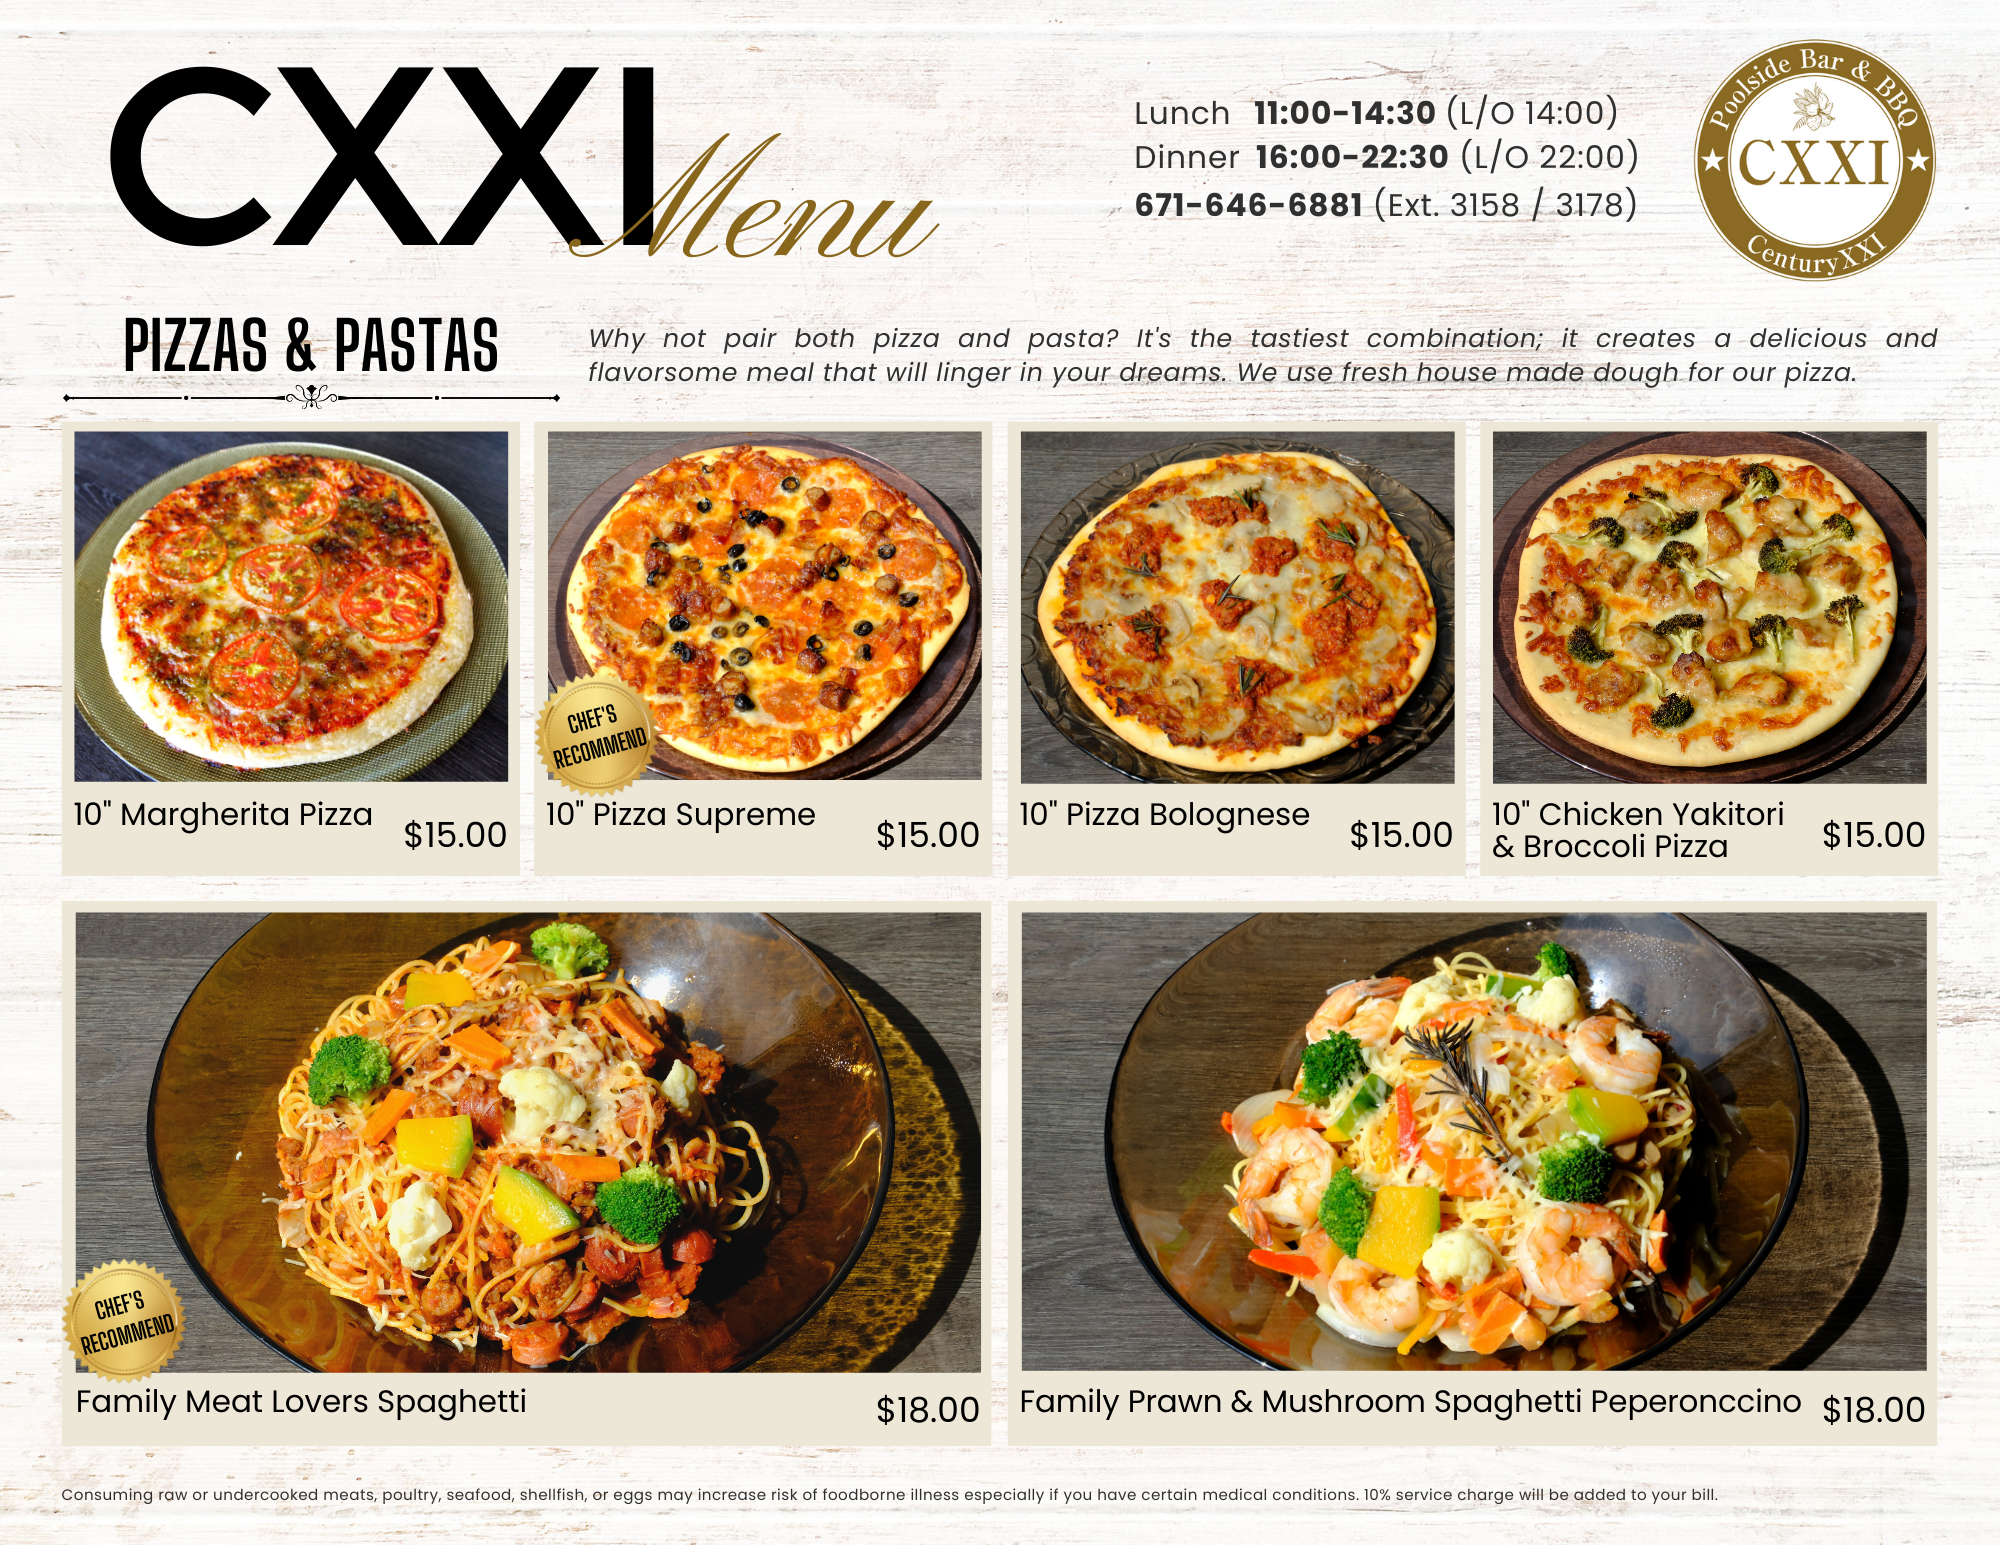 【Century XXI】Now Open for Lunch & Dinner with New Menu!